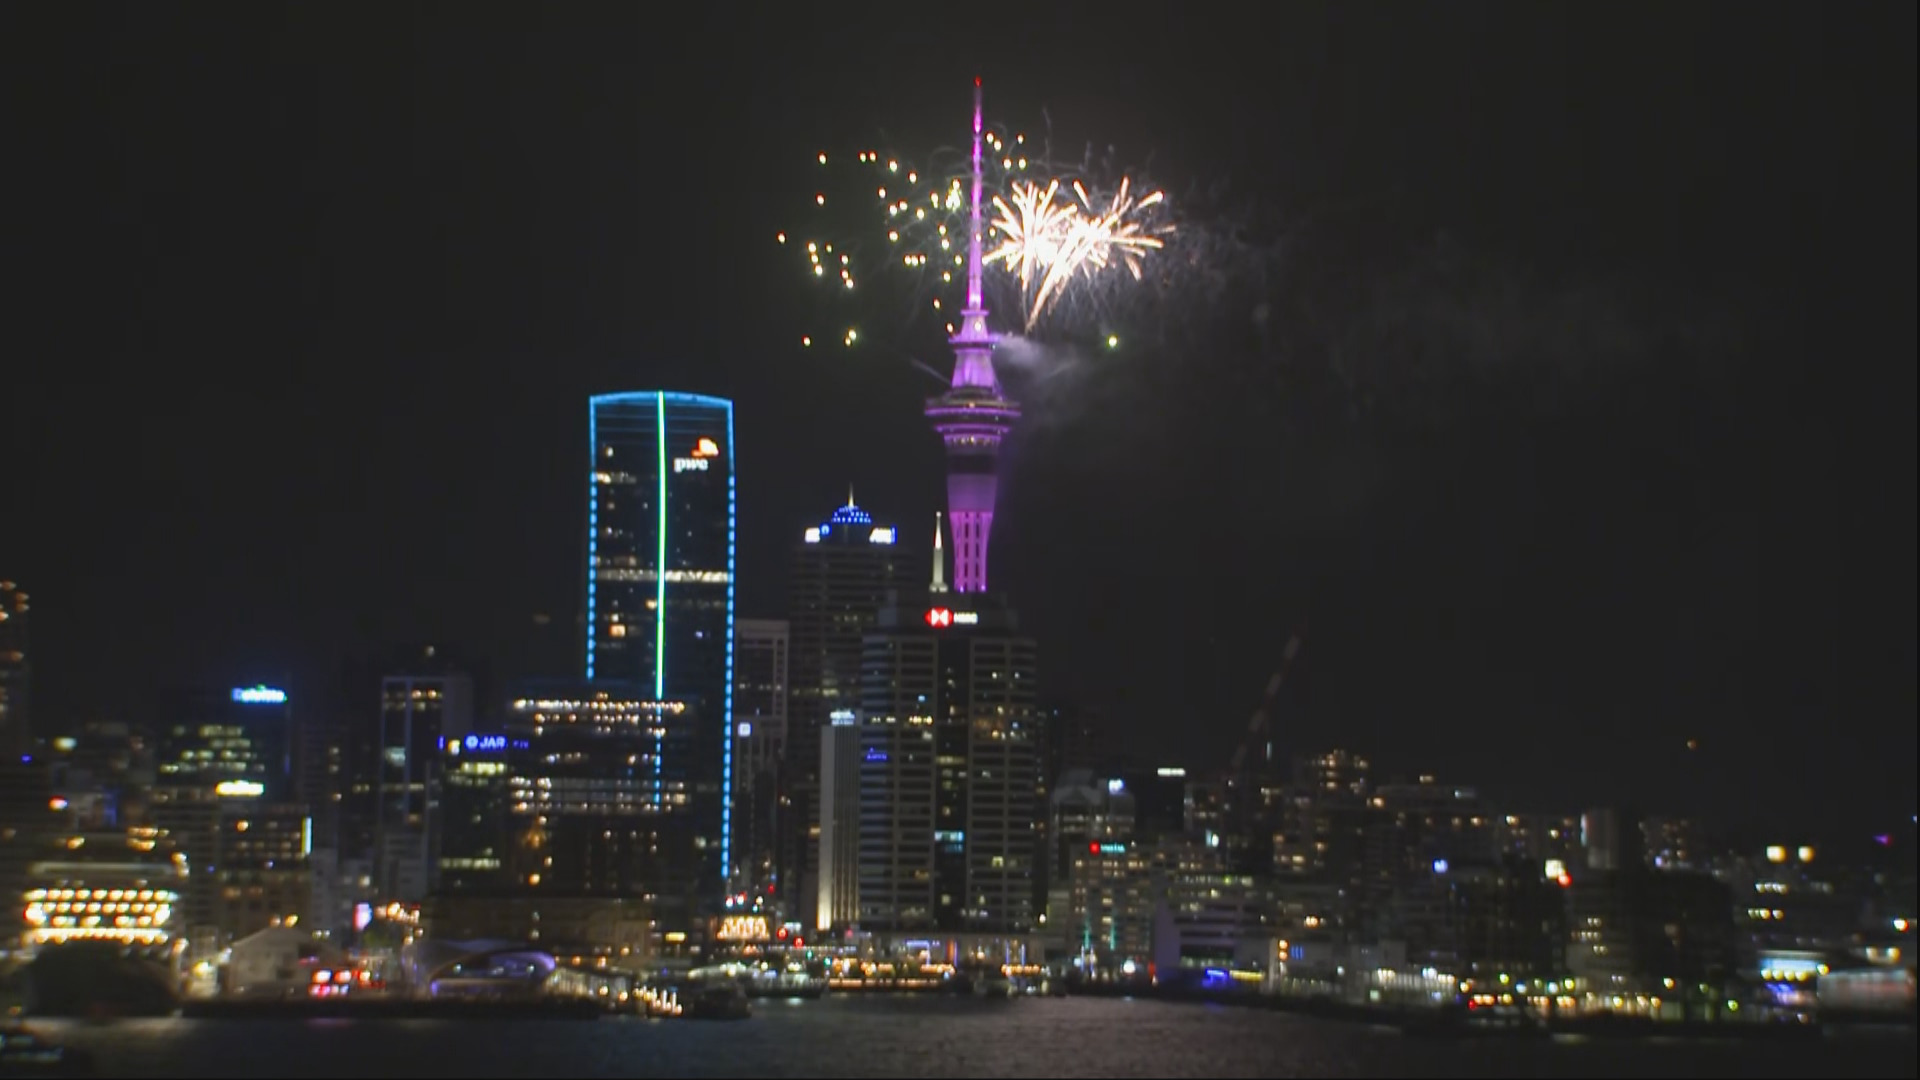 Watch: 2023 begins with a bang at Auckland's Sky Tower